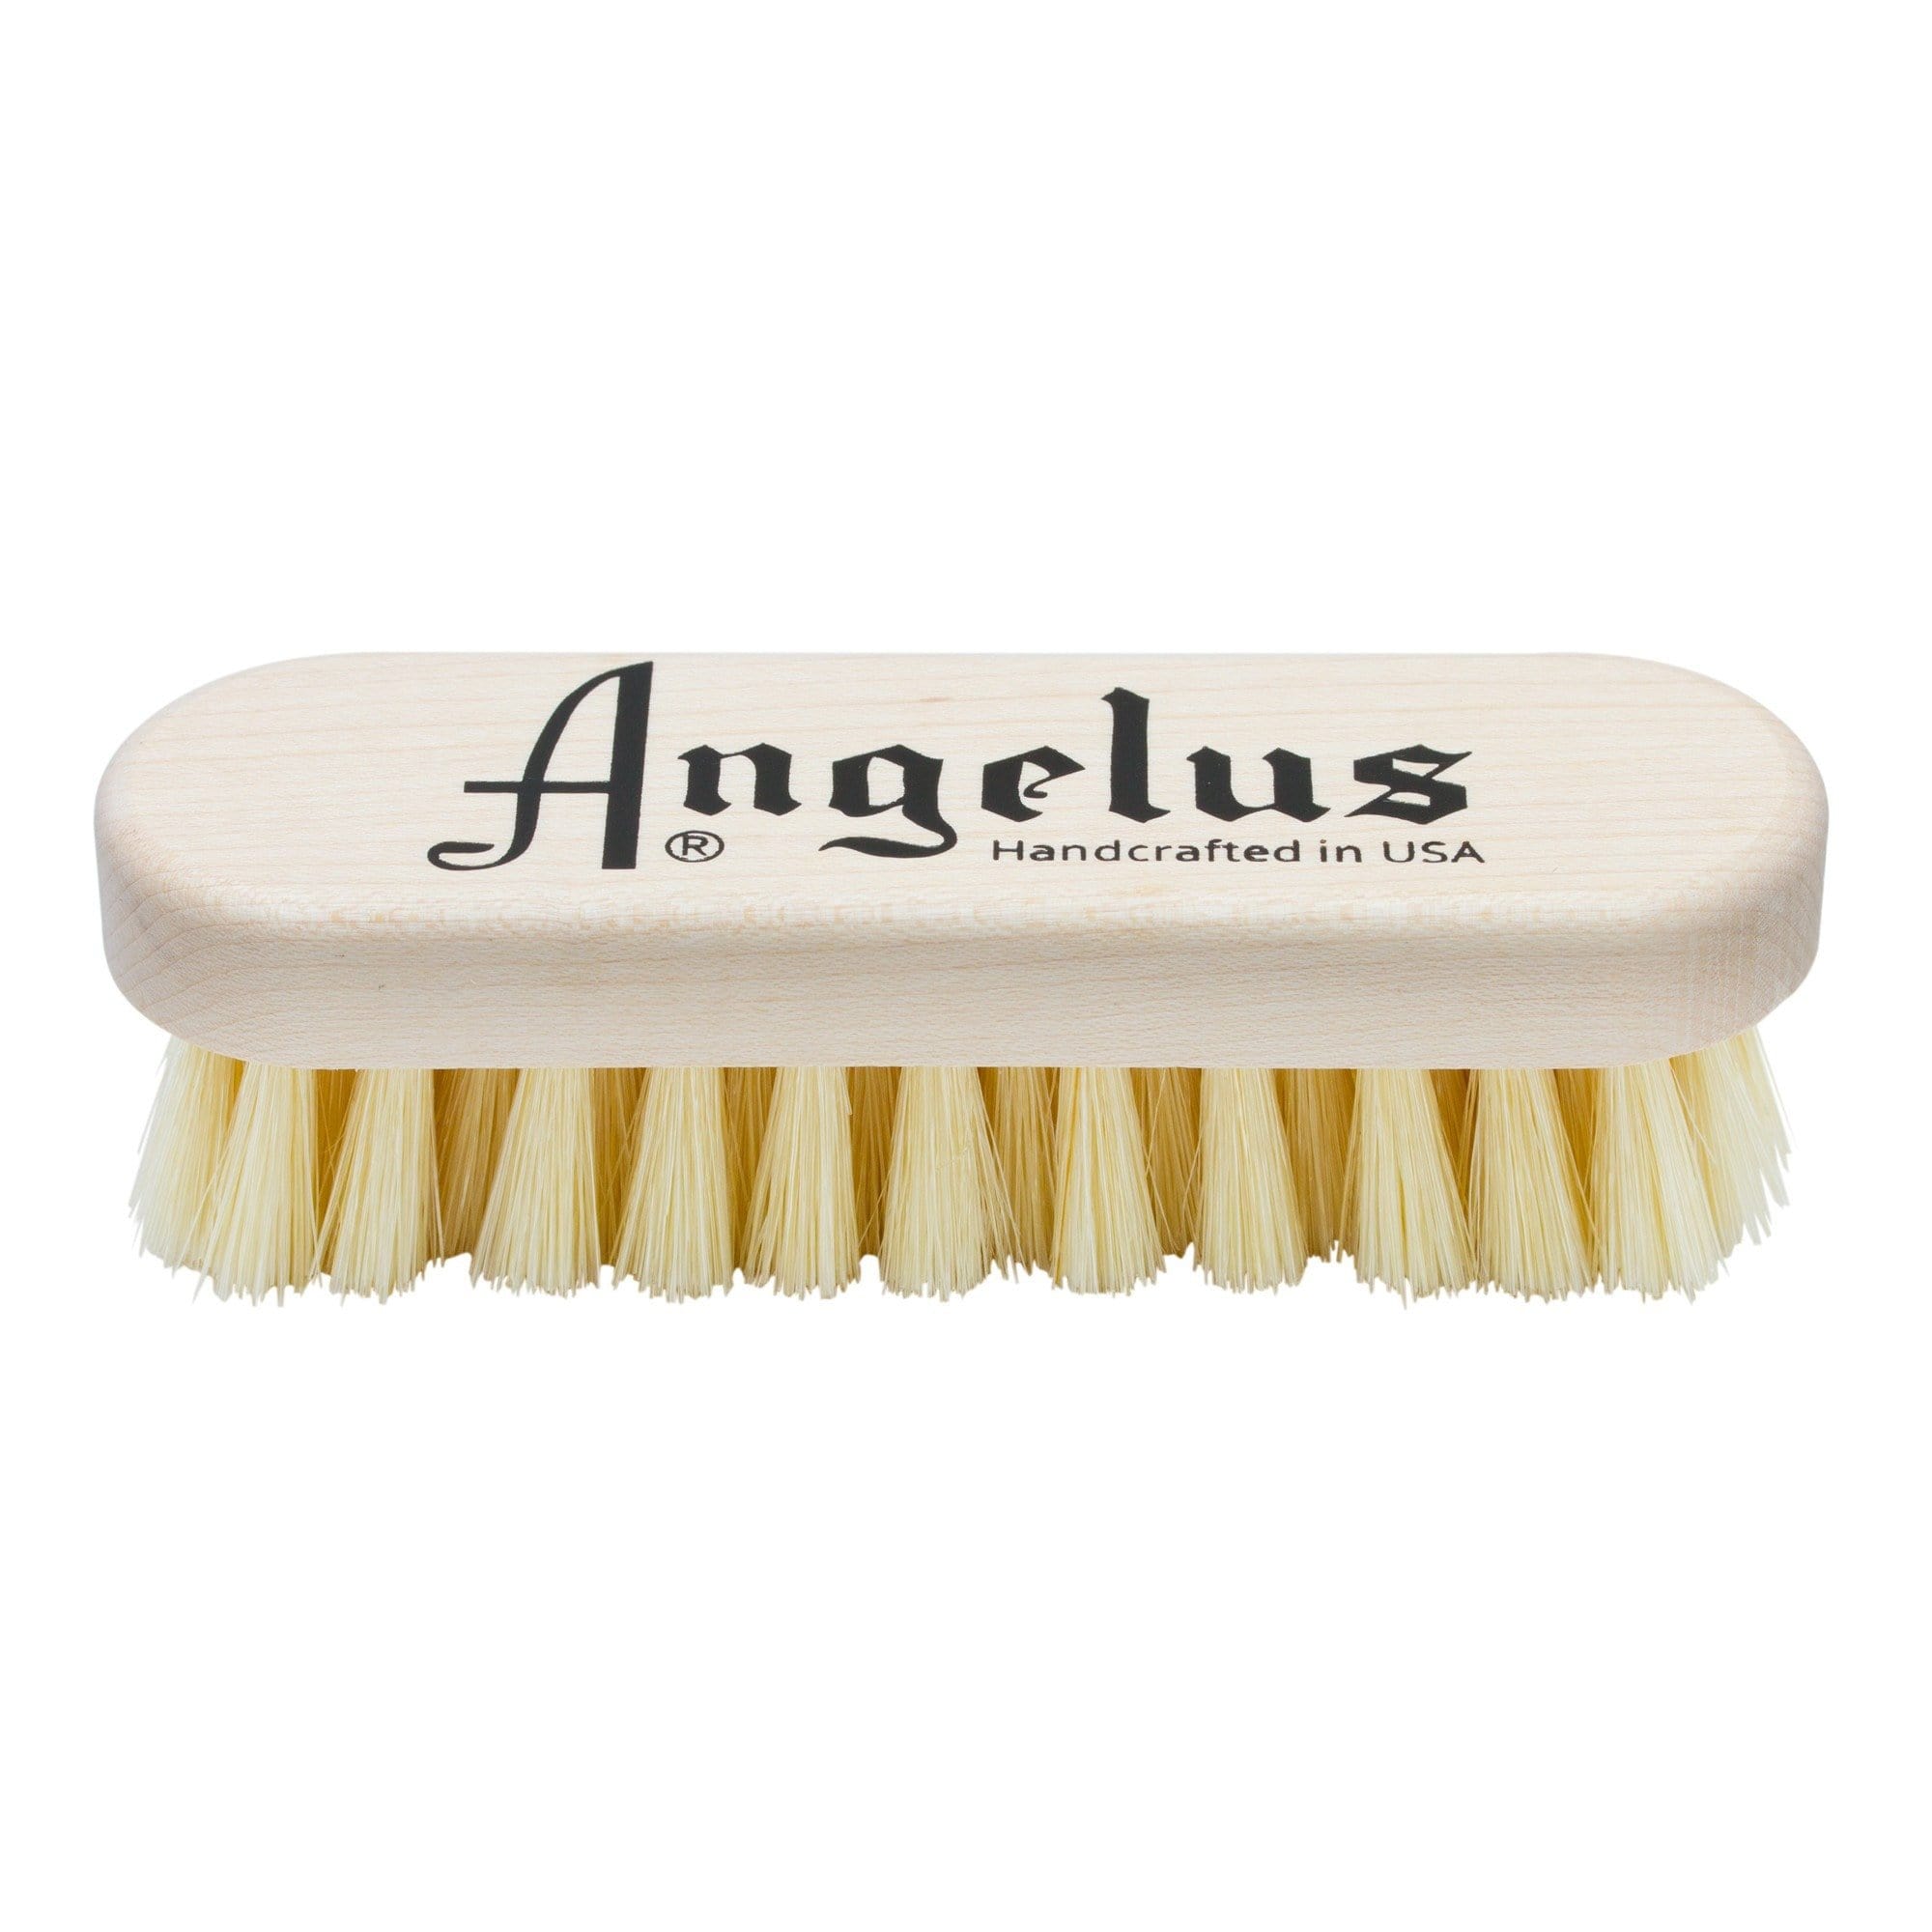 Wellington Deluxe Pig Bristle Suede Cleaning Brush